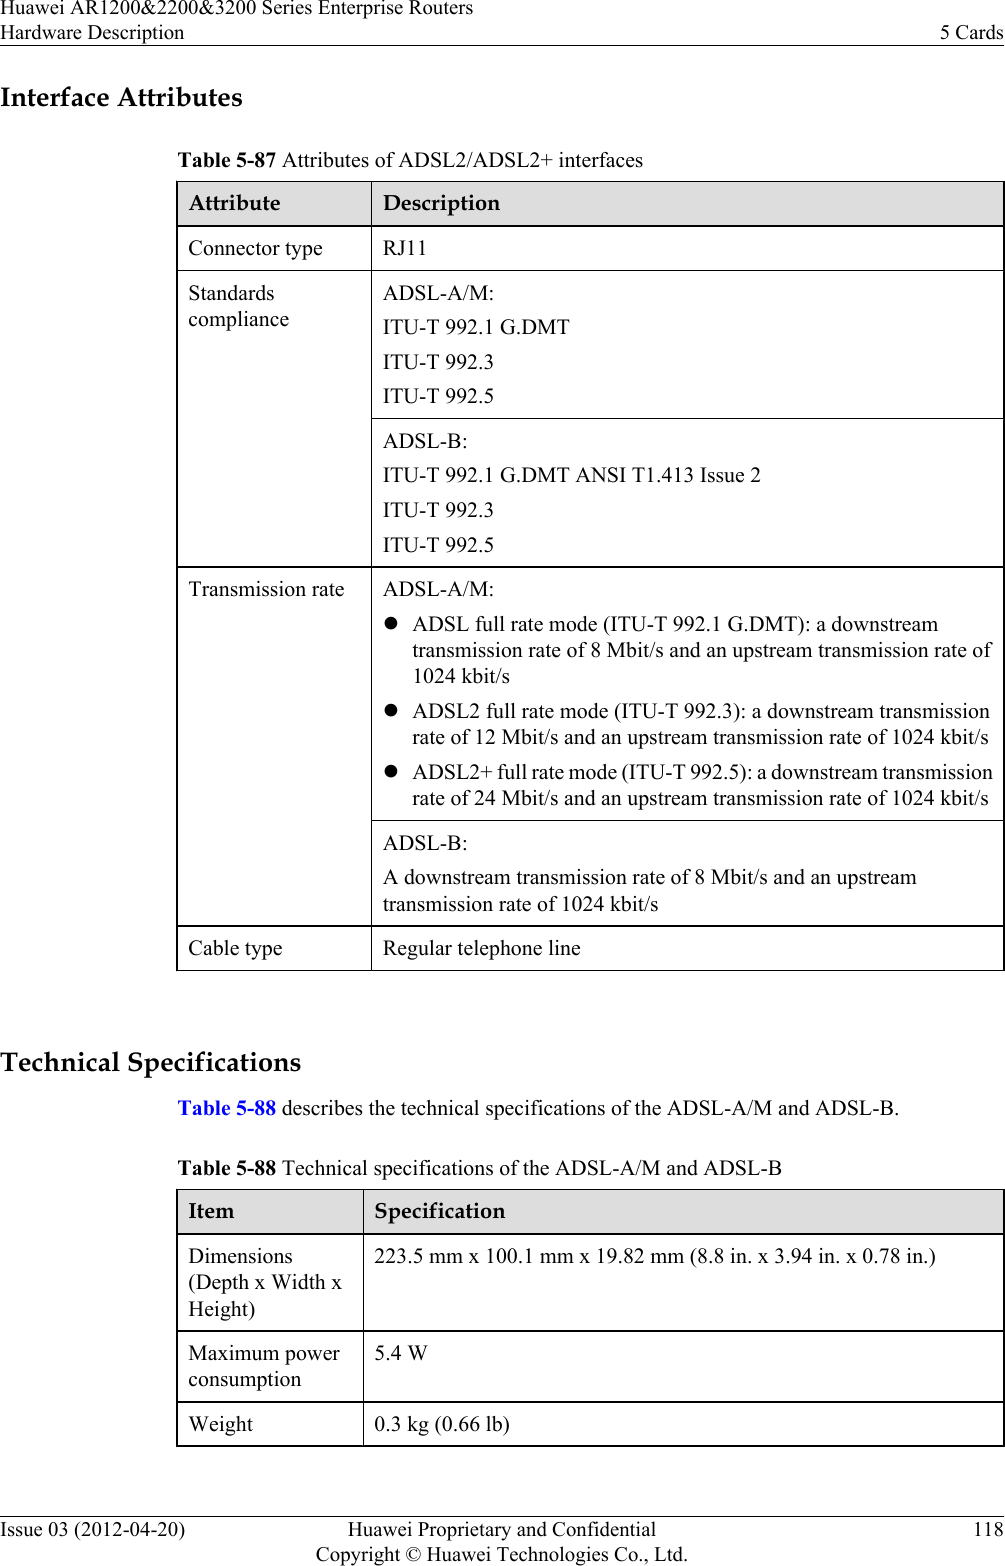 Interface AttributesTable 5-87 Attributes of ADSL2/ADSL2+ interfacesAttribute DescriptionConnector type RJ11StandardscomplianceADSL-A/M:ITU-T 992.1 G.DMTITU-T 992.3ITU-T 992.5ADSL-B:ITU-T 992.1 G.DMT ANSI T1.413 Issue 2ITU-T 992.3ITU-T 992.5Transmission rate ADSL-A/M:lADSL full rate mode (ITU-T 992.1 G.DMT): a downstreamtransmission rate of 8 Mbit/s and an upstream transmission rate of1024 kbit/slADSL2 full rate mode (ITU-T 992.3): a downstream transmissionrate of 12 Mbit/s and an upstream transmission rate of 1024 kbit/slADSL2+ full rate mode (ITU-T 992.5): a downstream transmissionrate of 24 Mbit/s and an upstream transmission rate of 1024 kbit/sADSL-B:A downstream transmission rate of 8 Mbit/s and an upstreamtransmission rate of 1024 kbit/sCable type Regular telephone line Technical SpecificationsTable 5-88 describes the technical specifications of the ADSL-A/M and ADSL-B.Table 5-88 Technical specifications of the ADSL-A/M and ADSL-BItem SpecificationDimensions(Depth x Width xHeight)223.5 mm x 100.1 mm x 19.82 mm (8.8 in. x 3.94 in. x 0.78 in.)Maximum powerconsumption5.4 WWeight 0.3 kg (0.66 lb) Huawei AR1200&amp;2200&amp;3200 Series Enterprise RoutersHardware Description 5 CardsIssue 03 (2012-04-20) Huawei Proprietary and ConfidentialCopyright © Huawei Technologies Co., Ltd.118